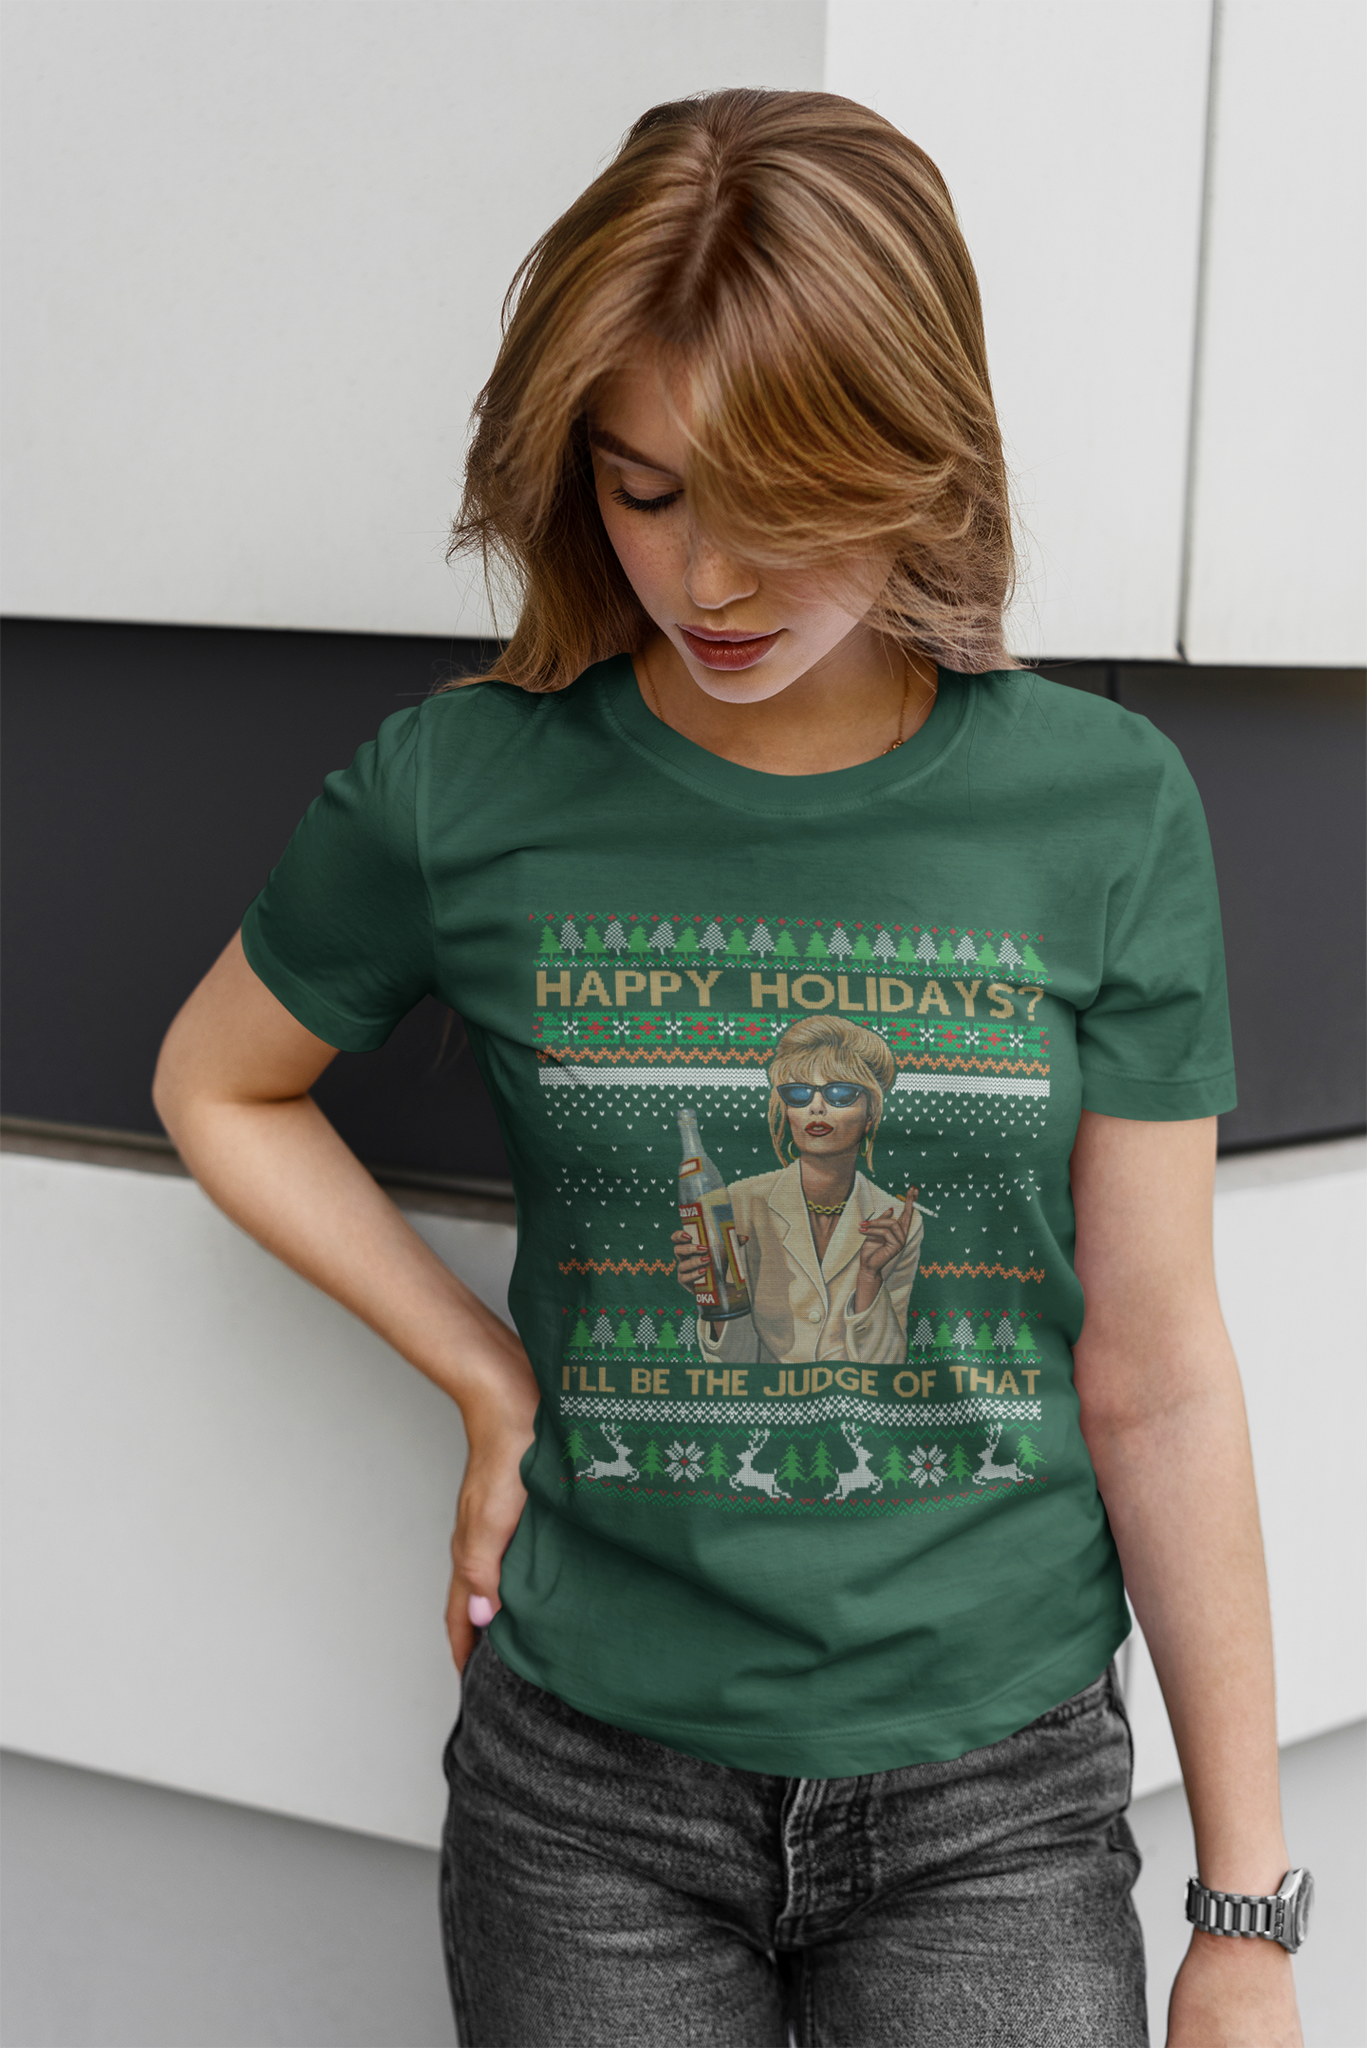 Absolutely Fabulous T Shirt, Patsy T Shirt, Happy Holidays Ill Be The Judge Of That Tshirt, Christmas Gift